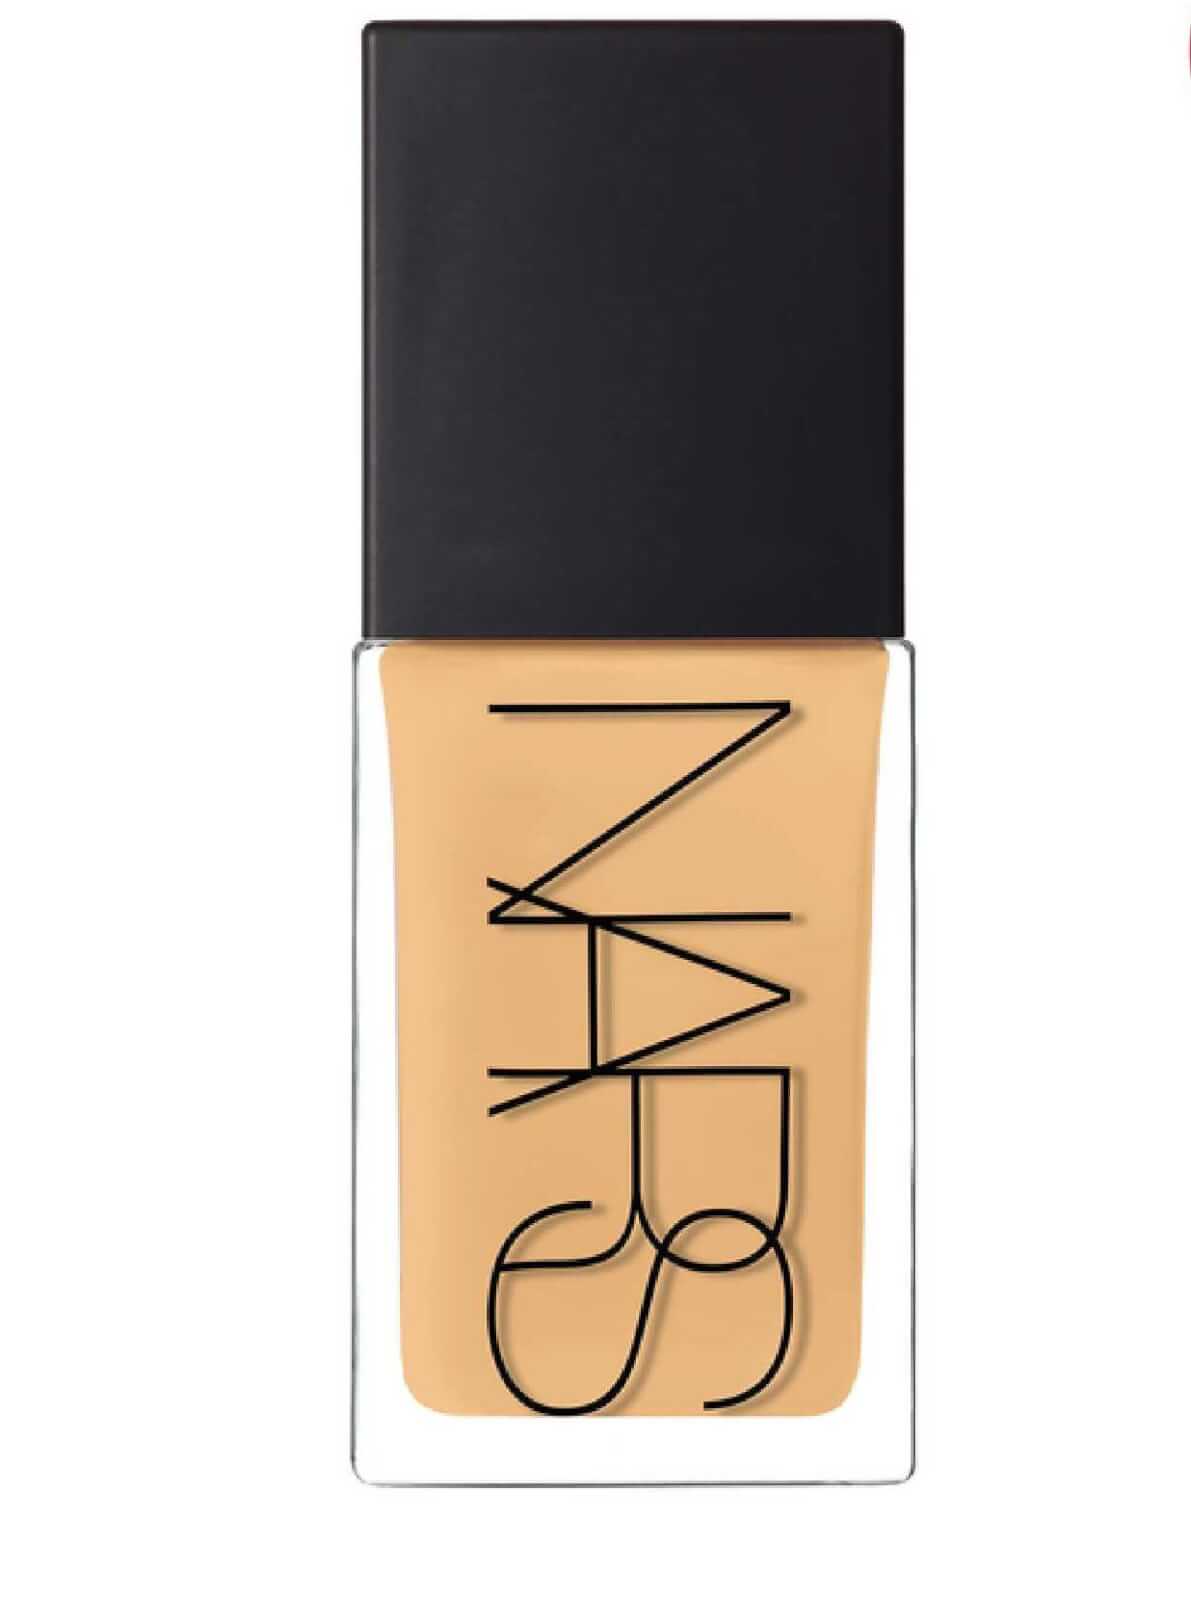 #ANOKHI20: Here’s How You Can Get The Best Beauty Looks From The ANOKHI Emerald Series:Nars Light Reflecting Advanced Skin Care Foundation. Photo Credit: www.narscosmetics.ca